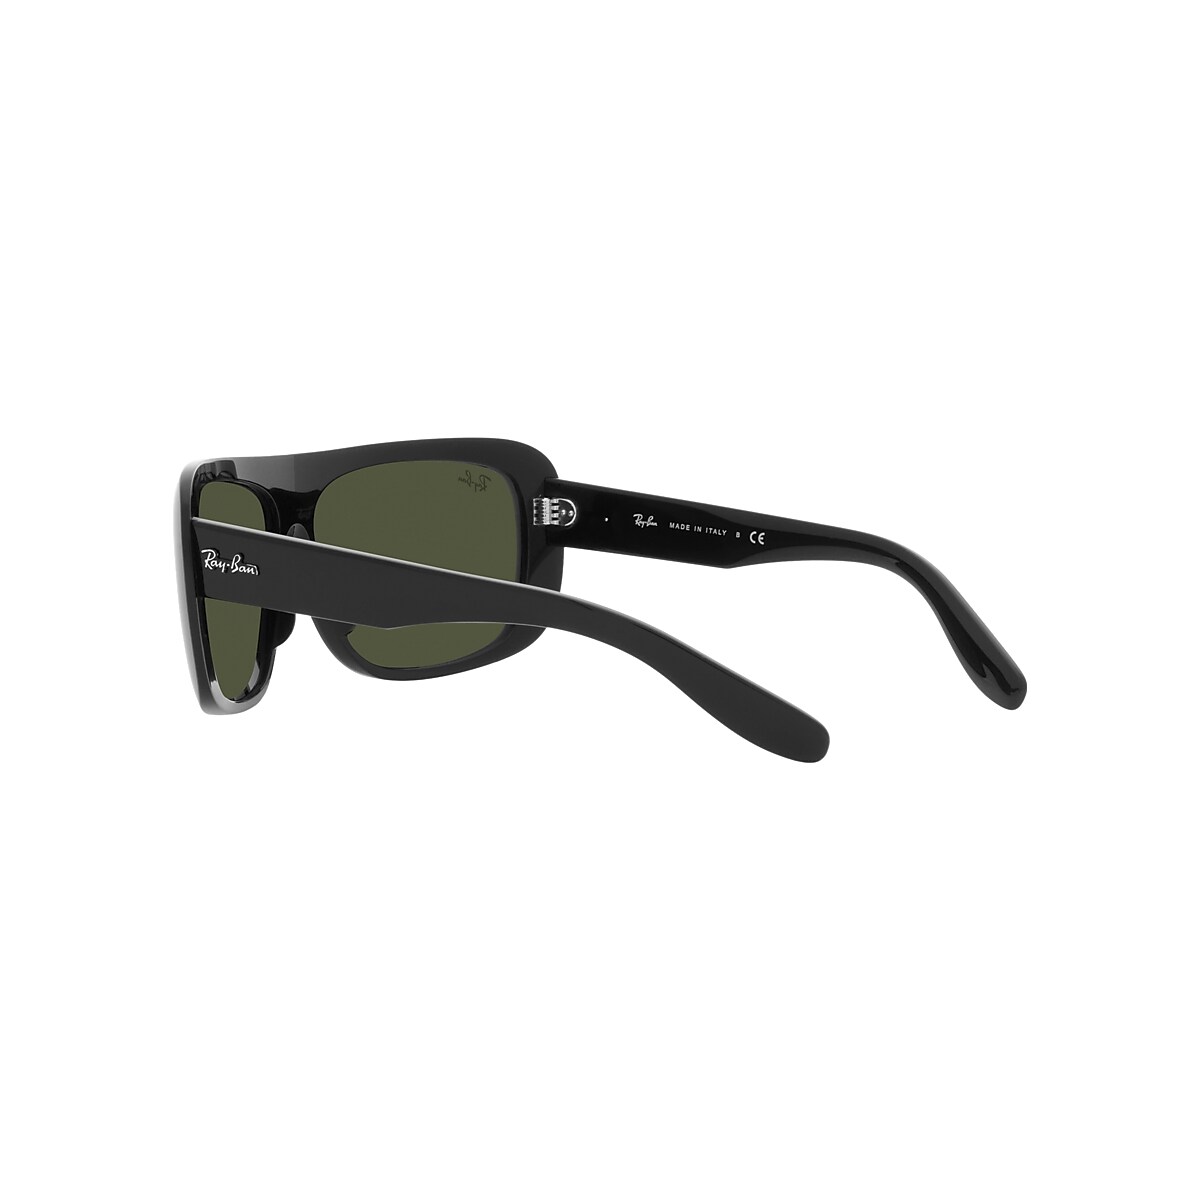 BLAIR Sunglasses in Black and Green RB2196 Ray-Ban® IE